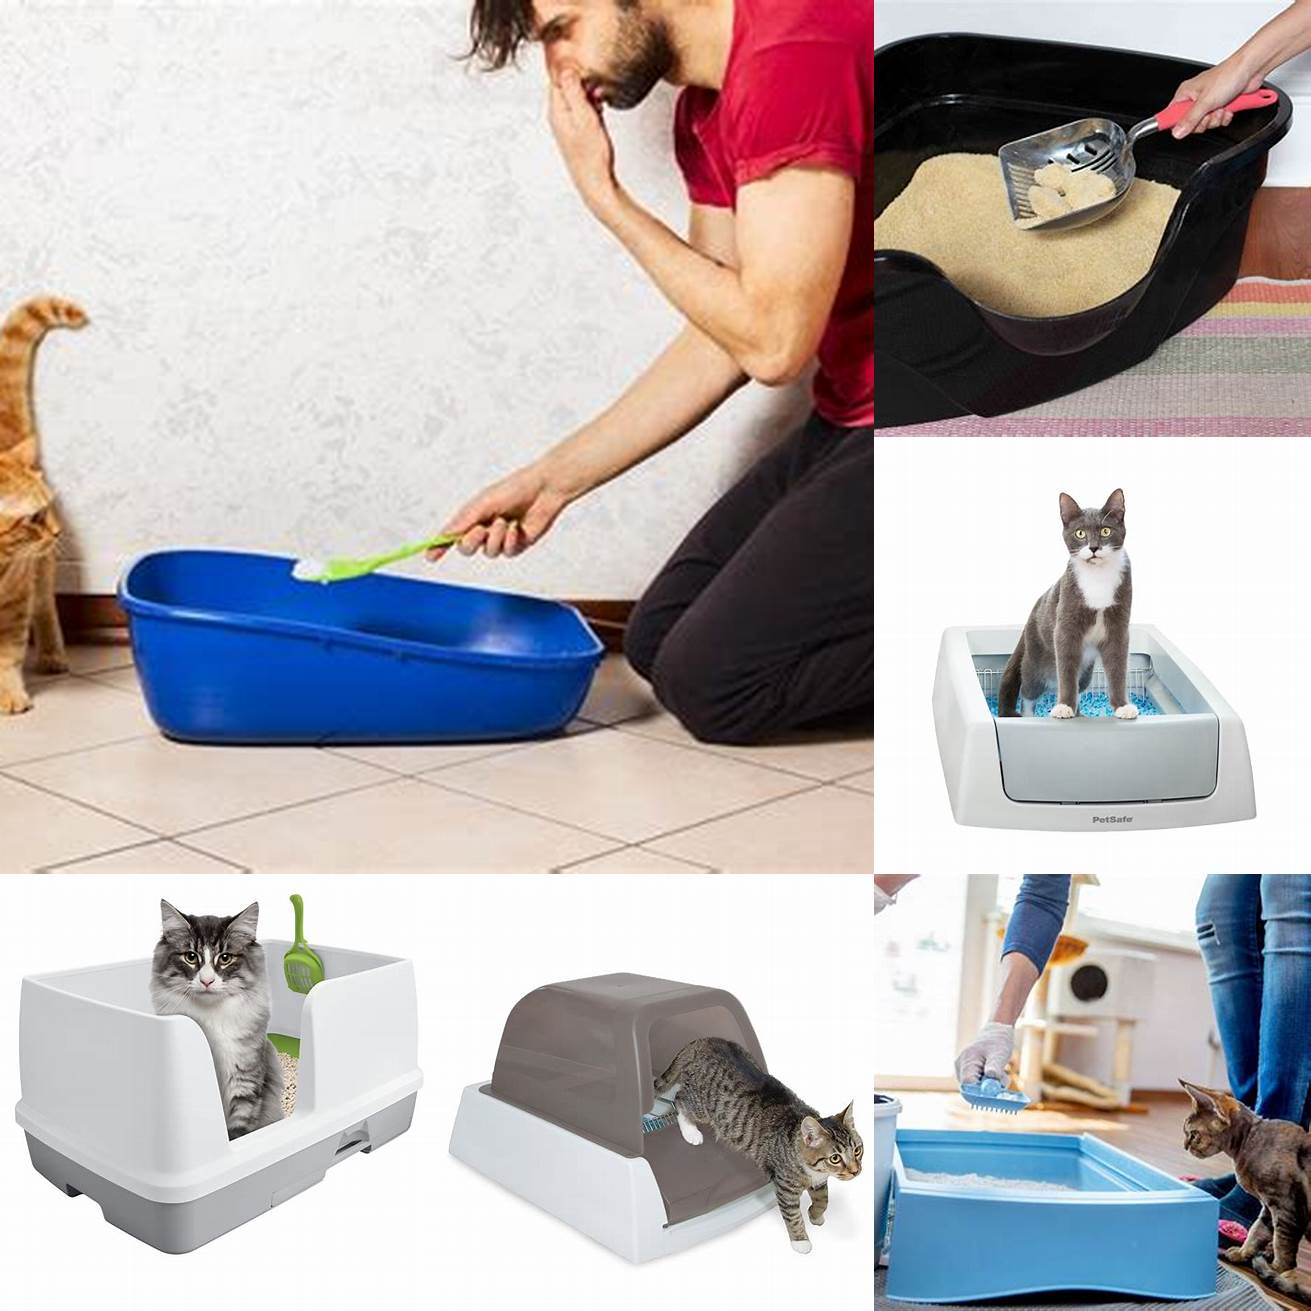 Clean the litter box regularly to keep it fresh and odor-free